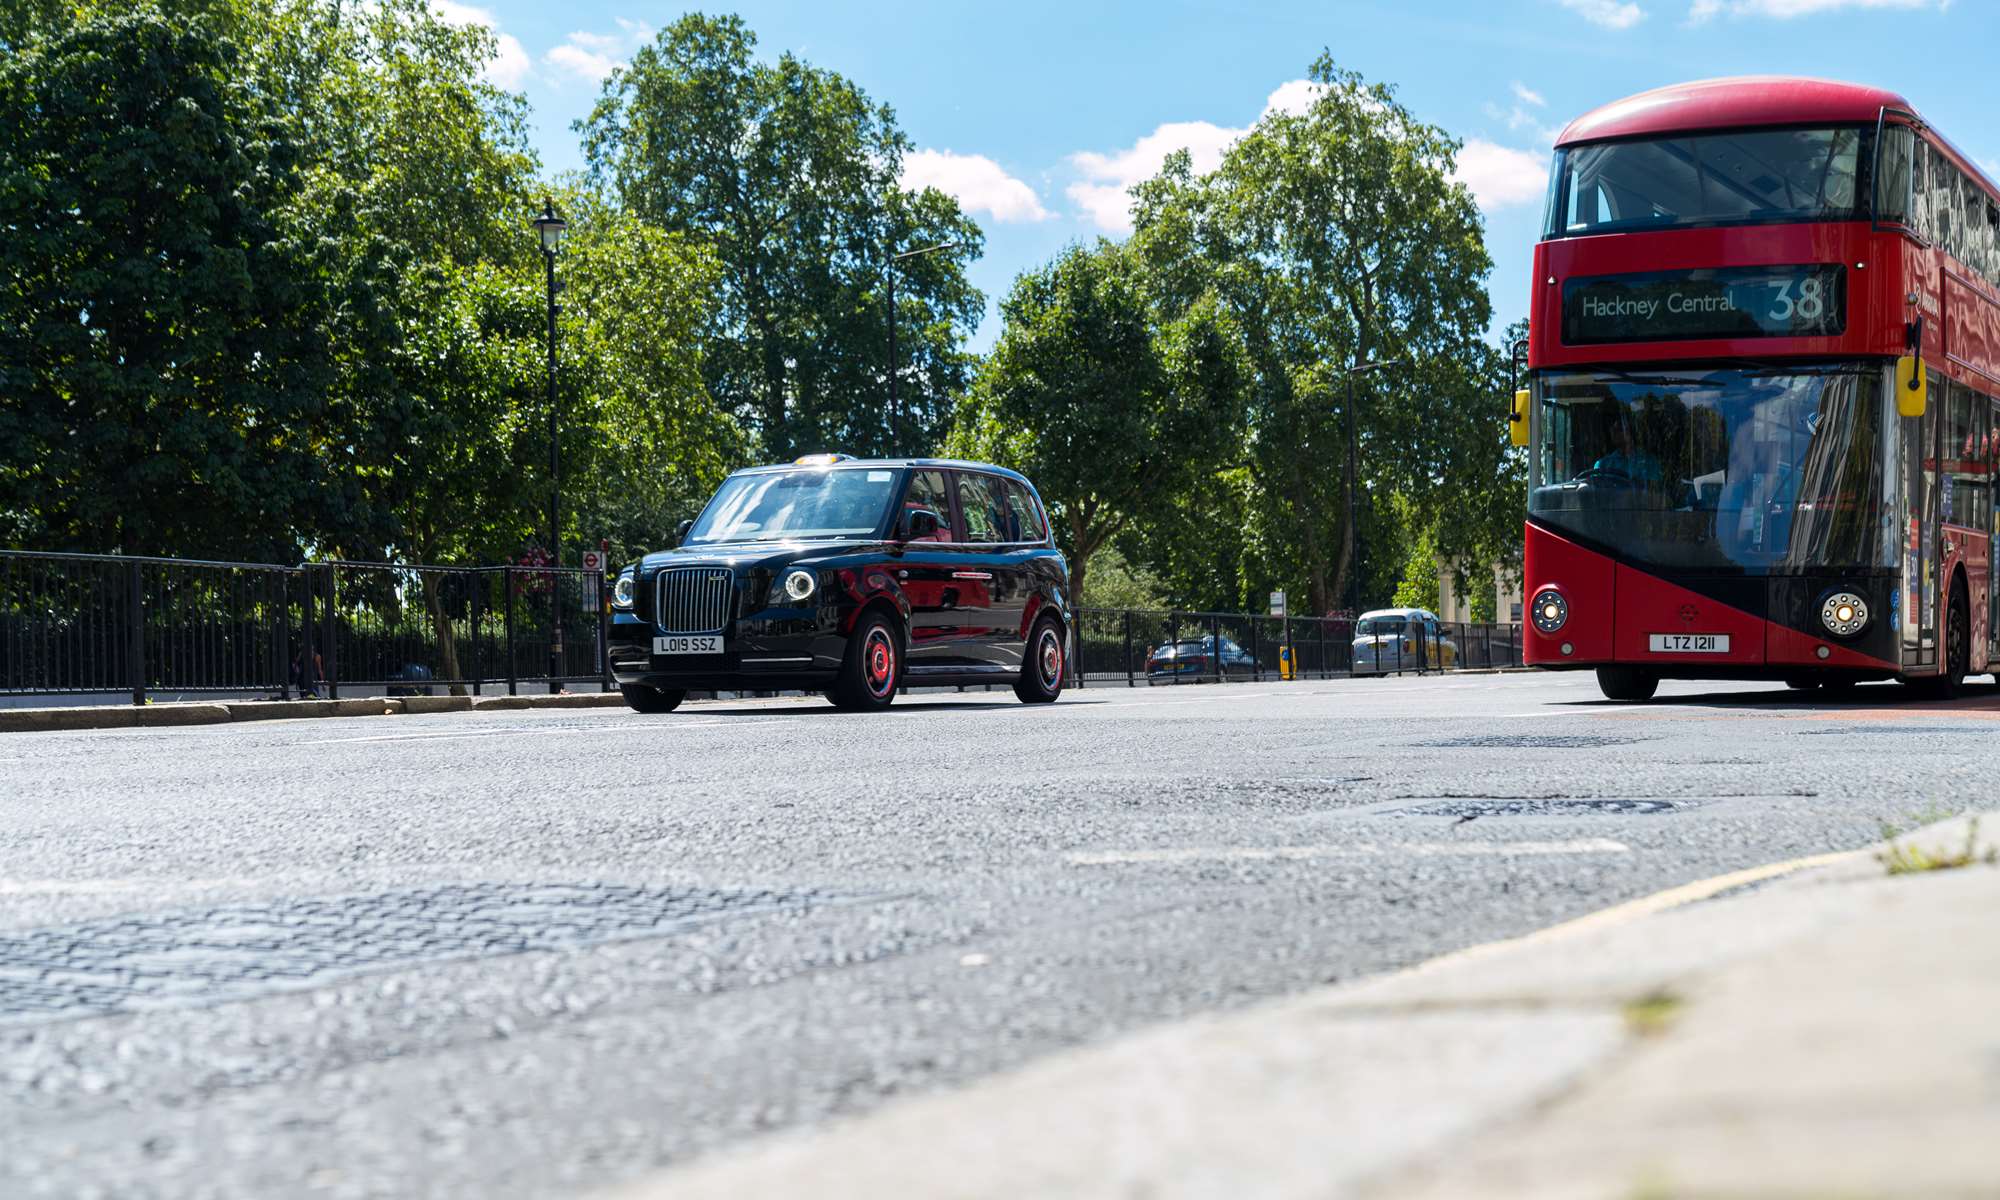 Day time view of red bus and taxi on a London street